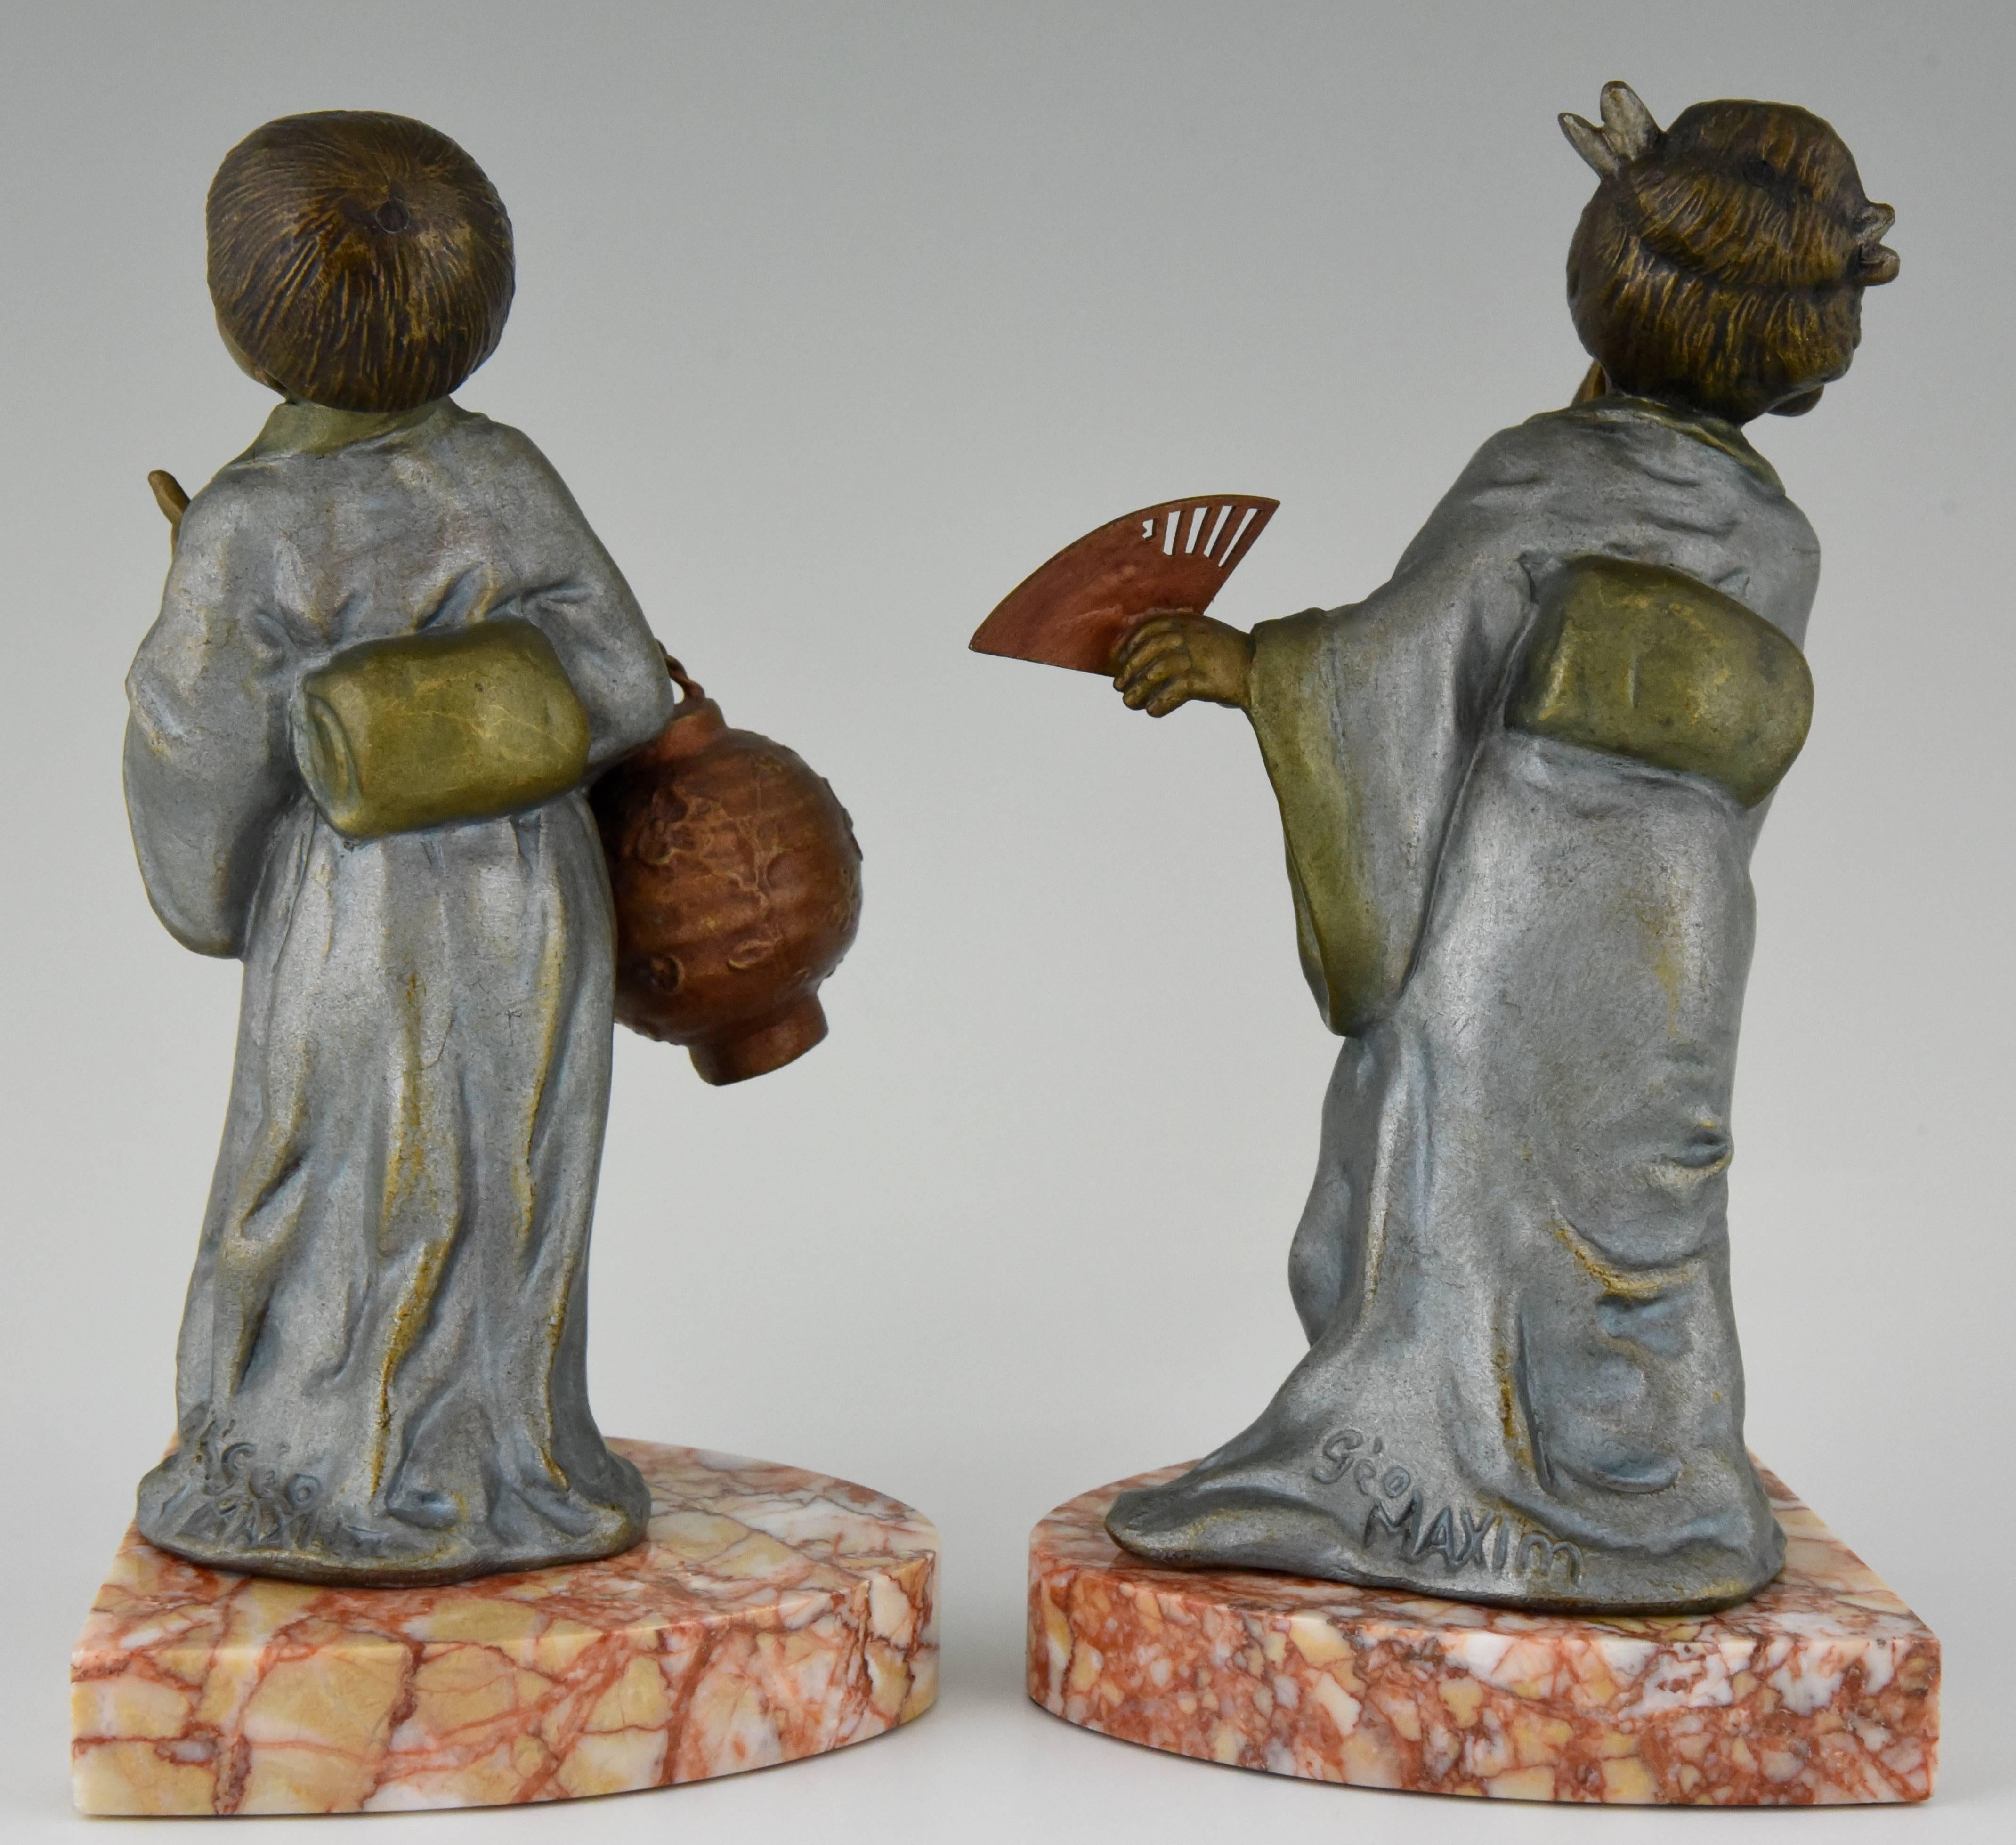 French Art Deco Bookends with Chinese Children, Geo Maxim, 1930 France